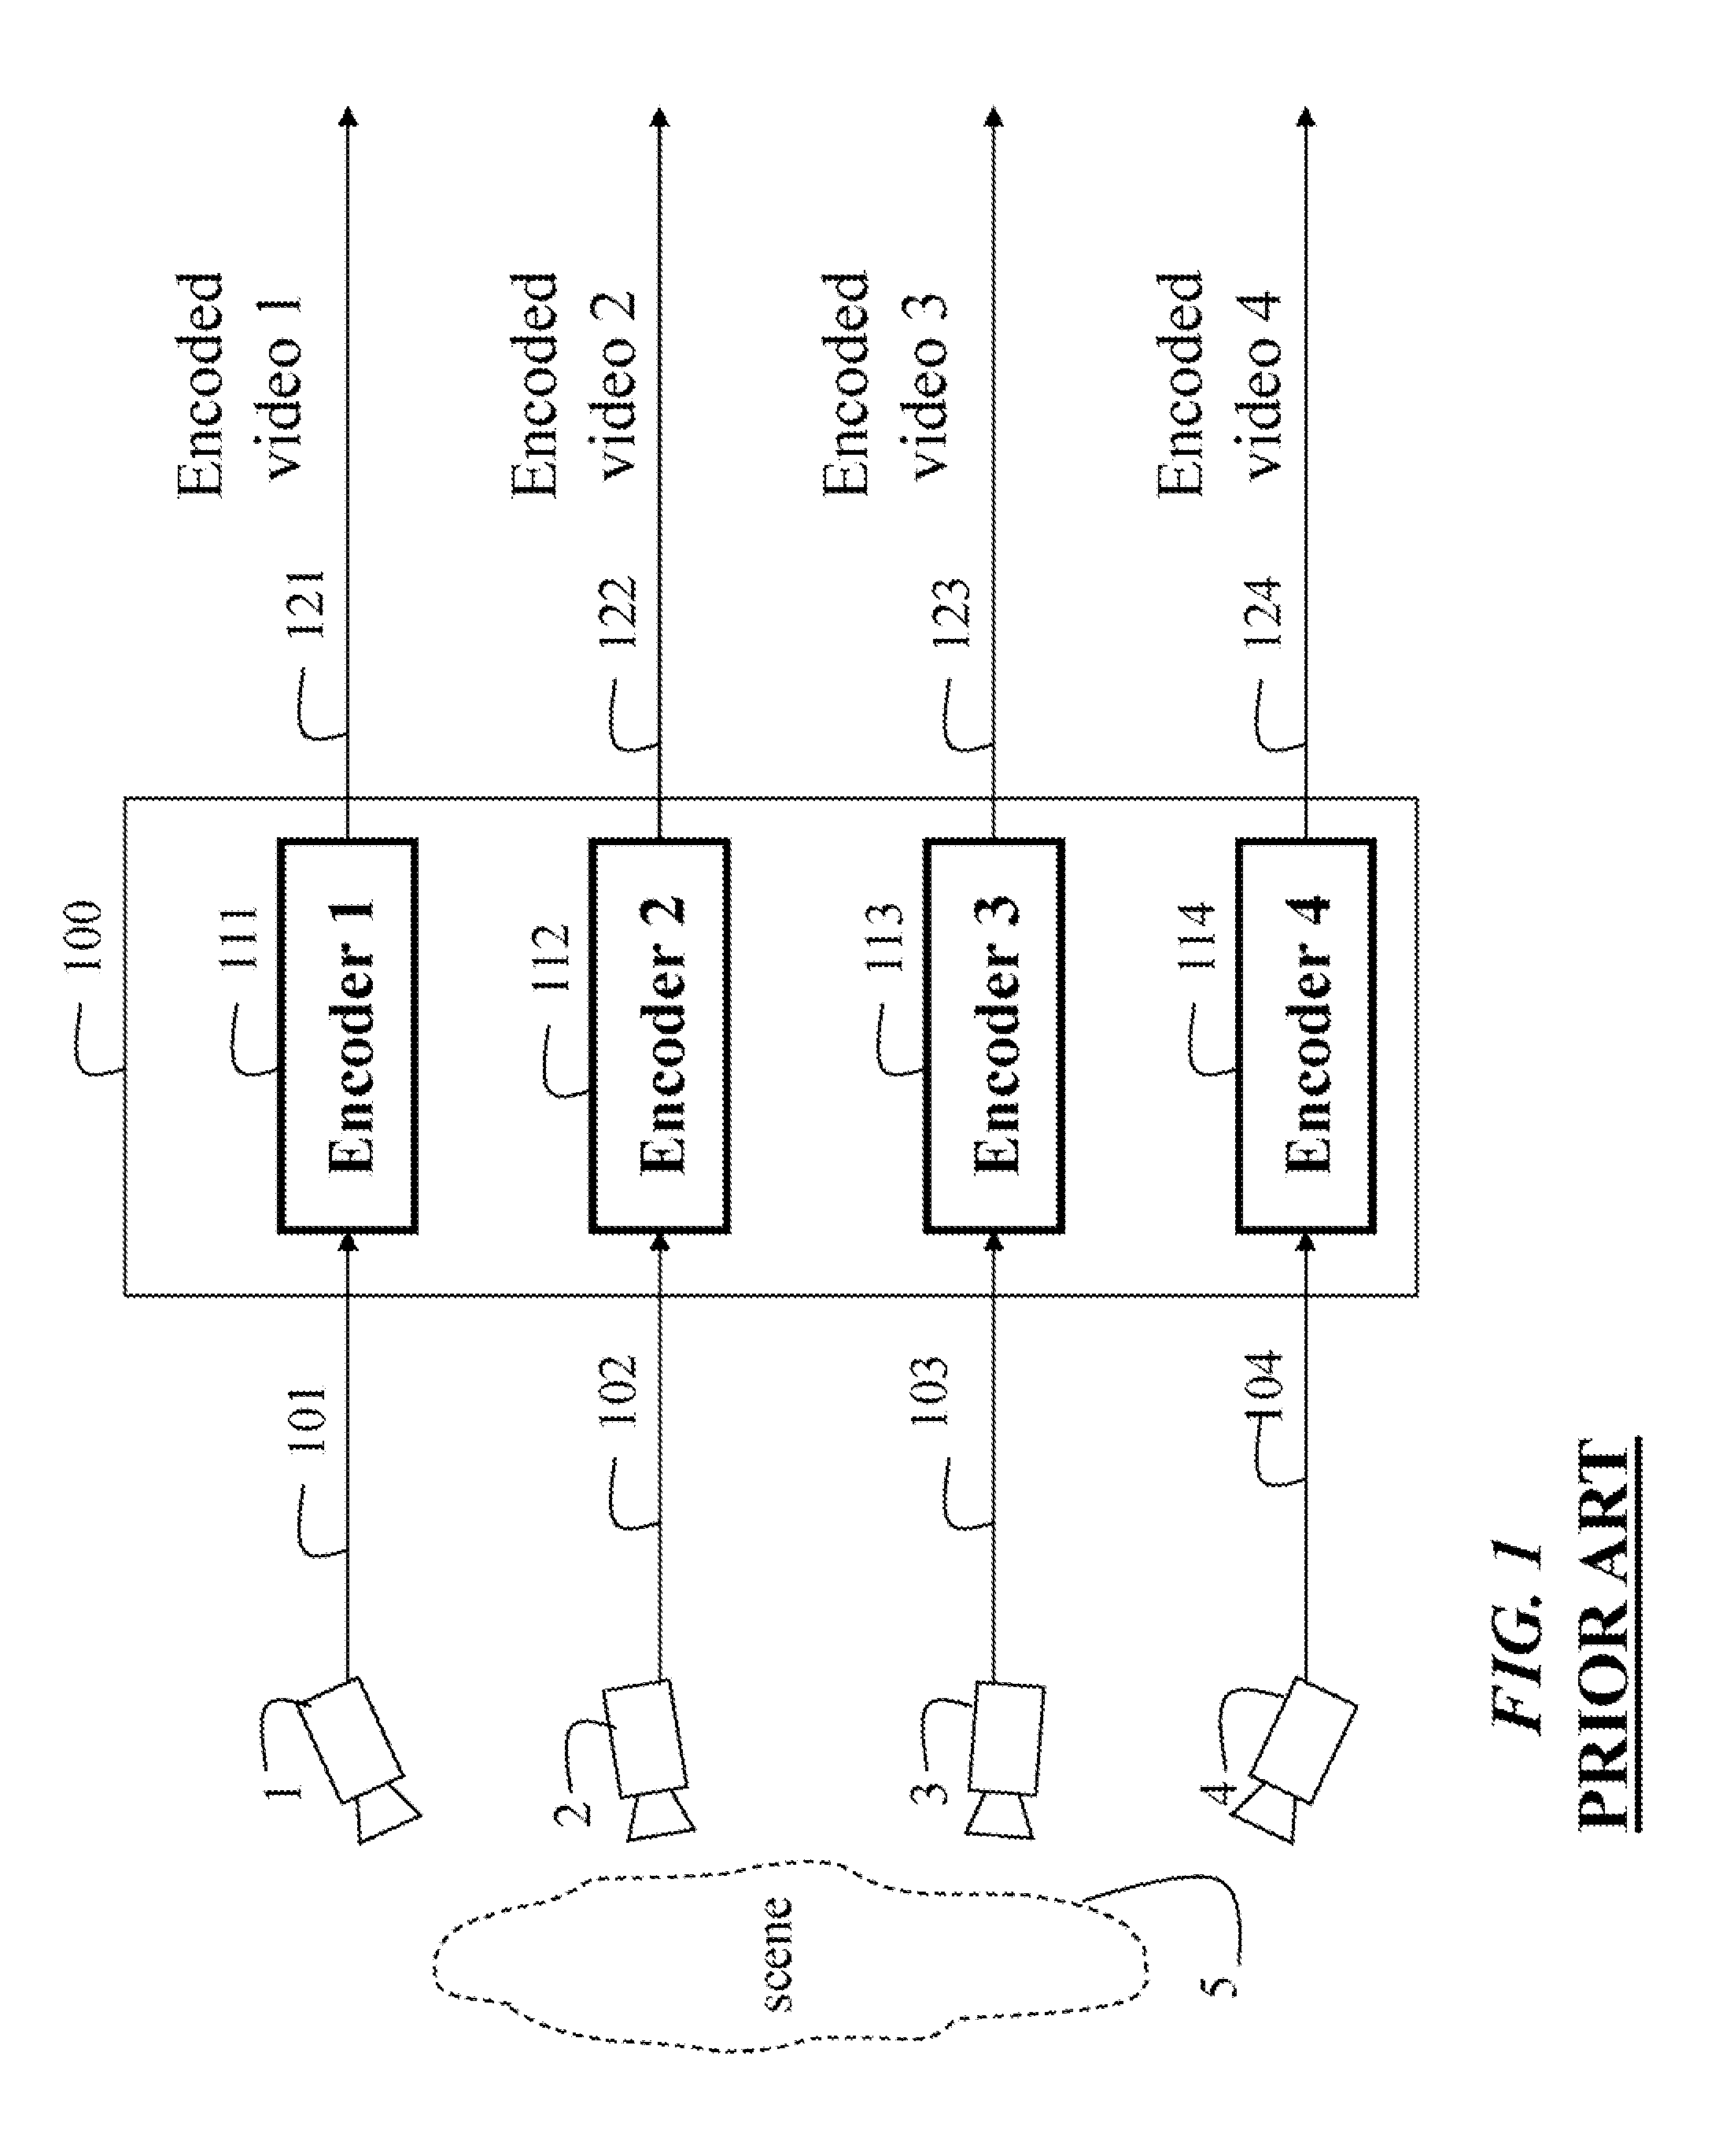 Method and System for Processing Multiview Videos for View Synthesis Using Skip and Direct Modes